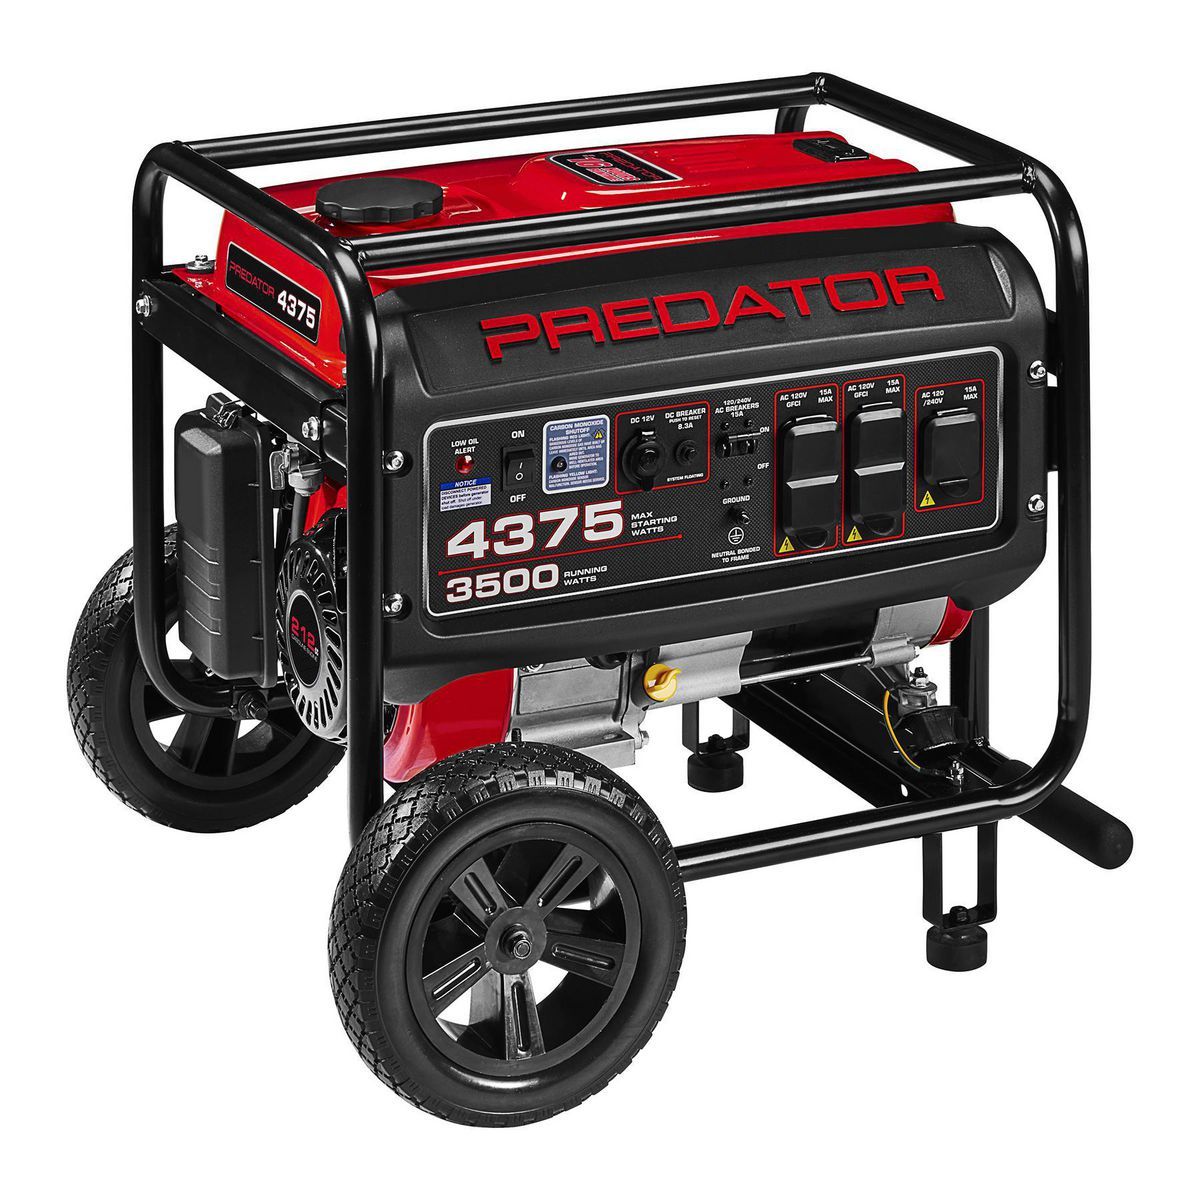 4375 Watt Gas Powered Portable Generator with CO SECURE Technology, CARB